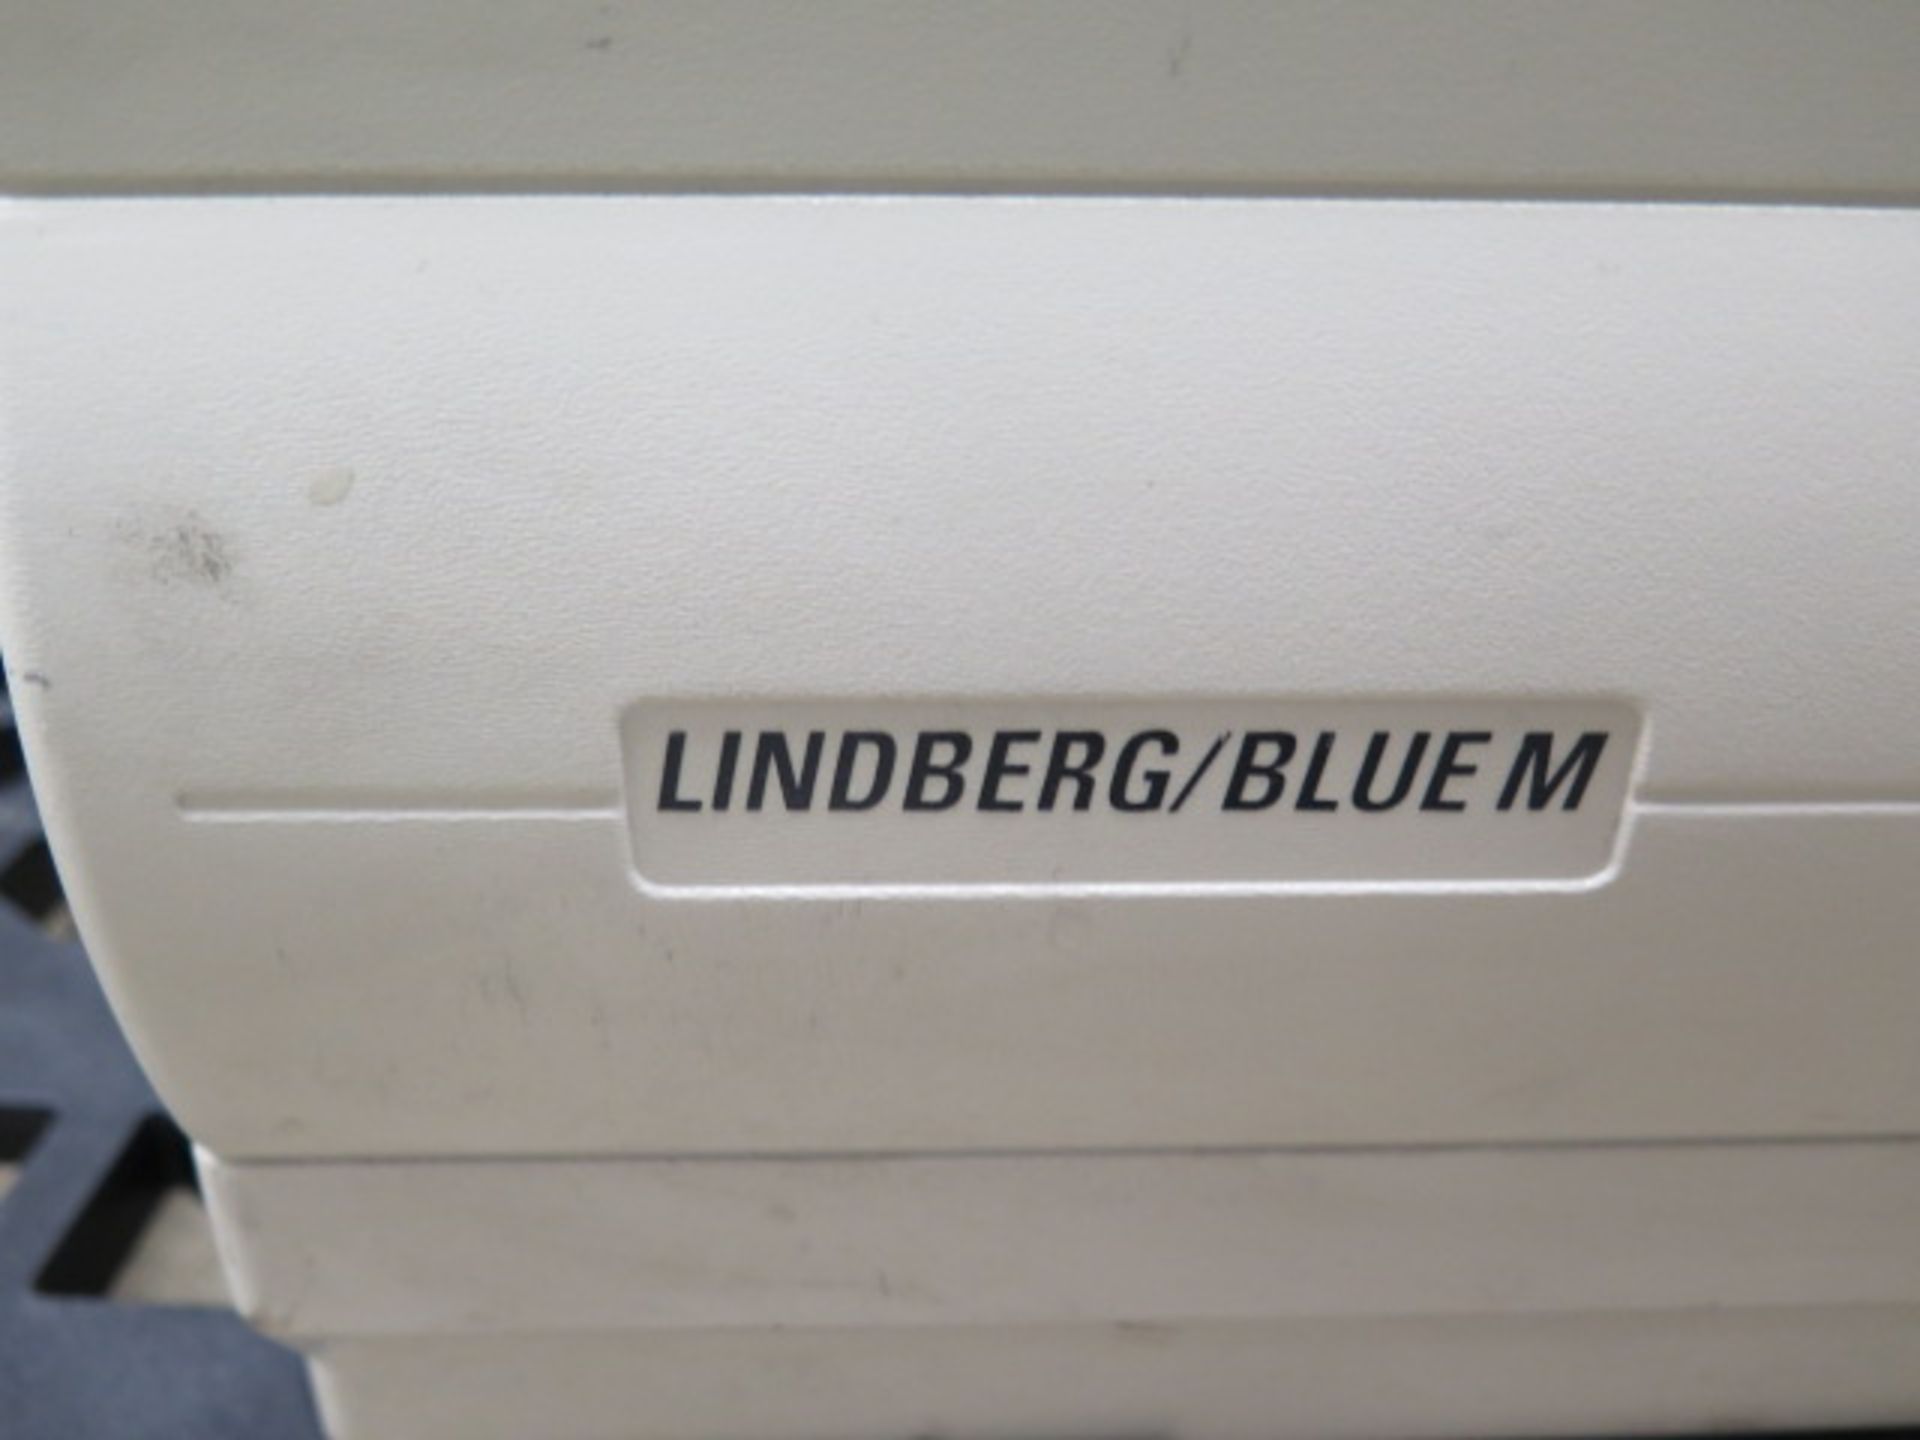 Thermo Electron Lindberg / BlueM mdl. MO1440A-1 Oven s/n Z15R-509008-ZR 300 Degrees C, SOLD AS IS - Image 6 of 8